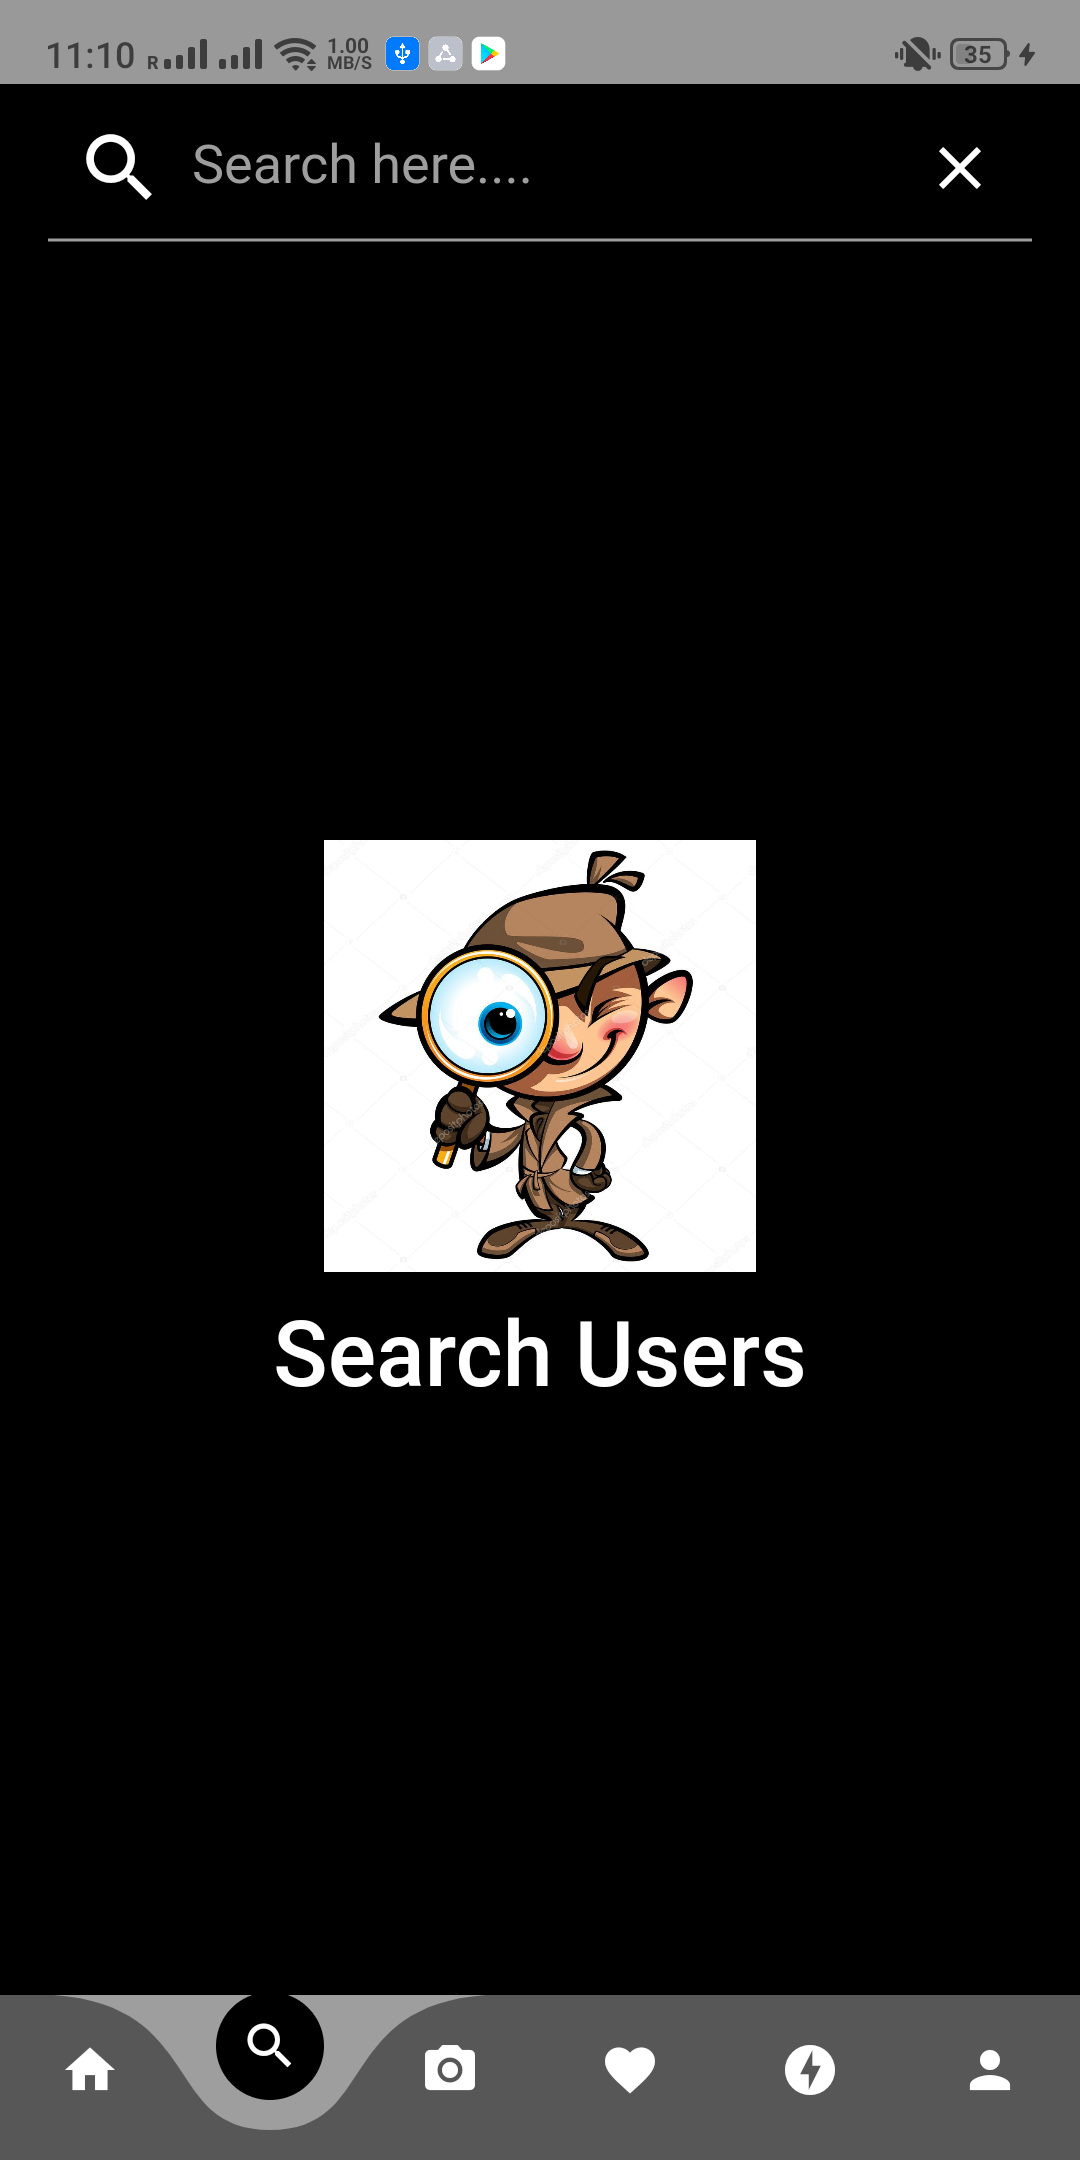 Search Users